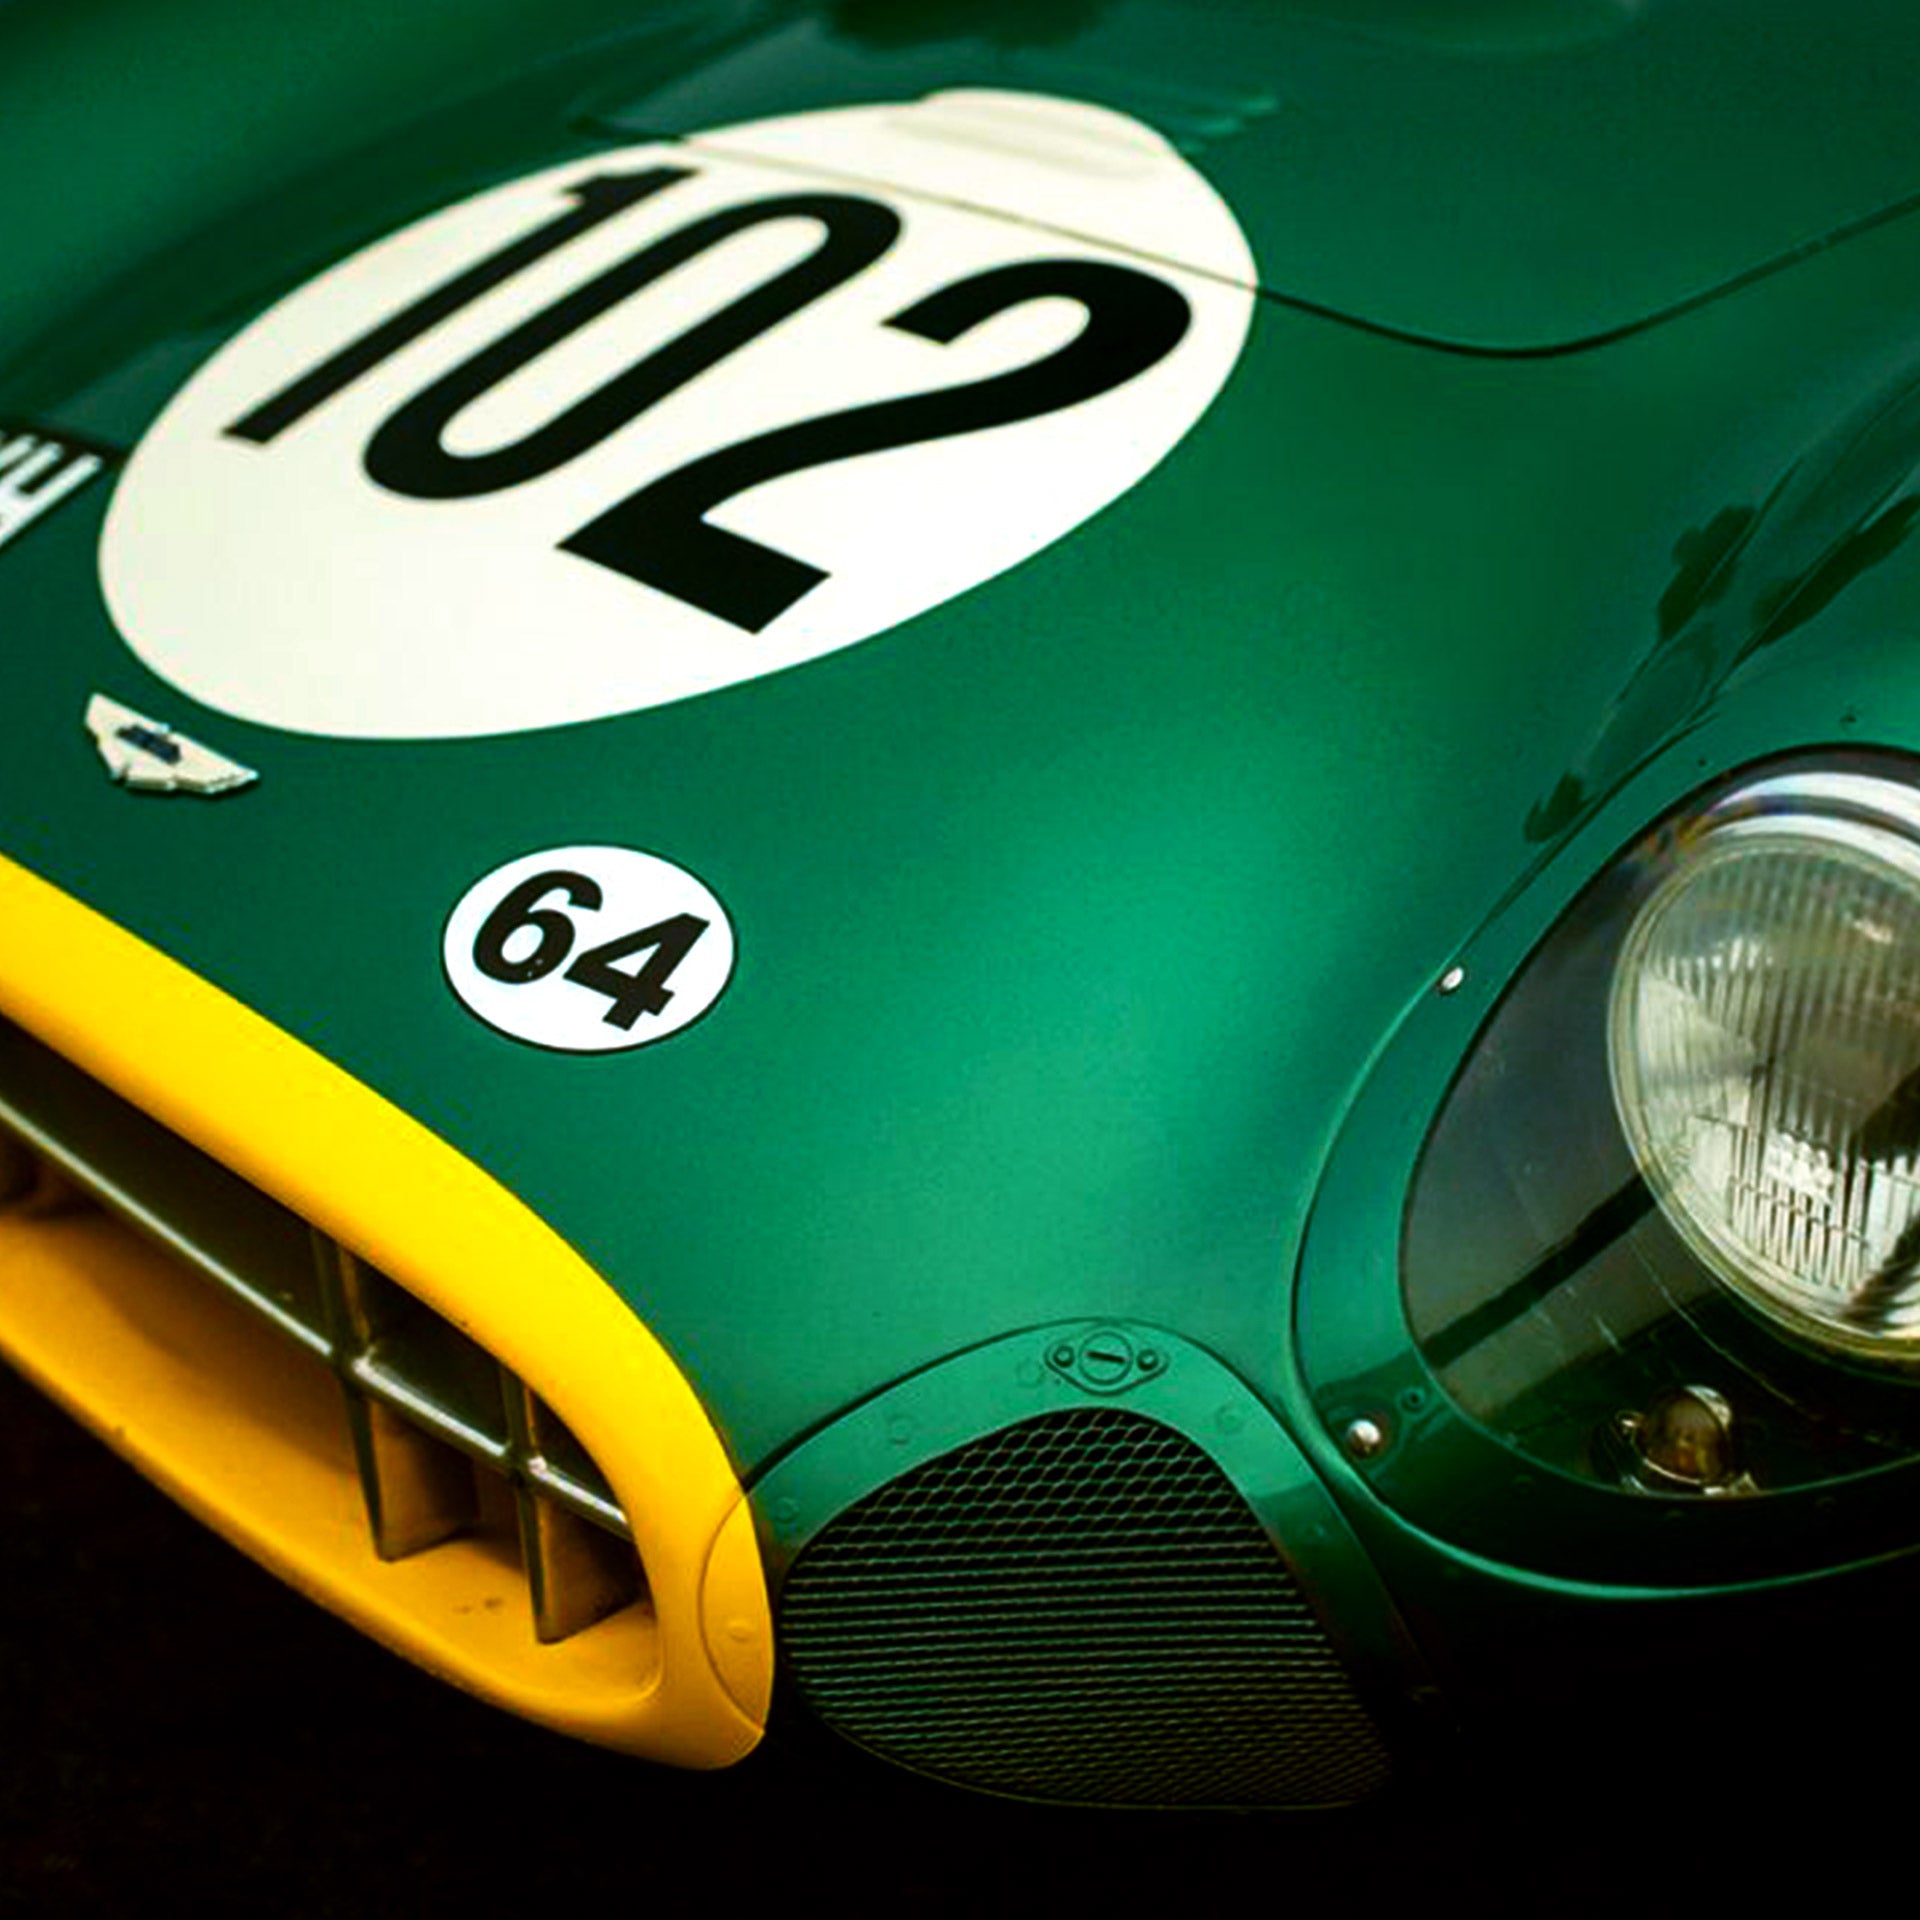 The Spirit of Competition: British Racing Green